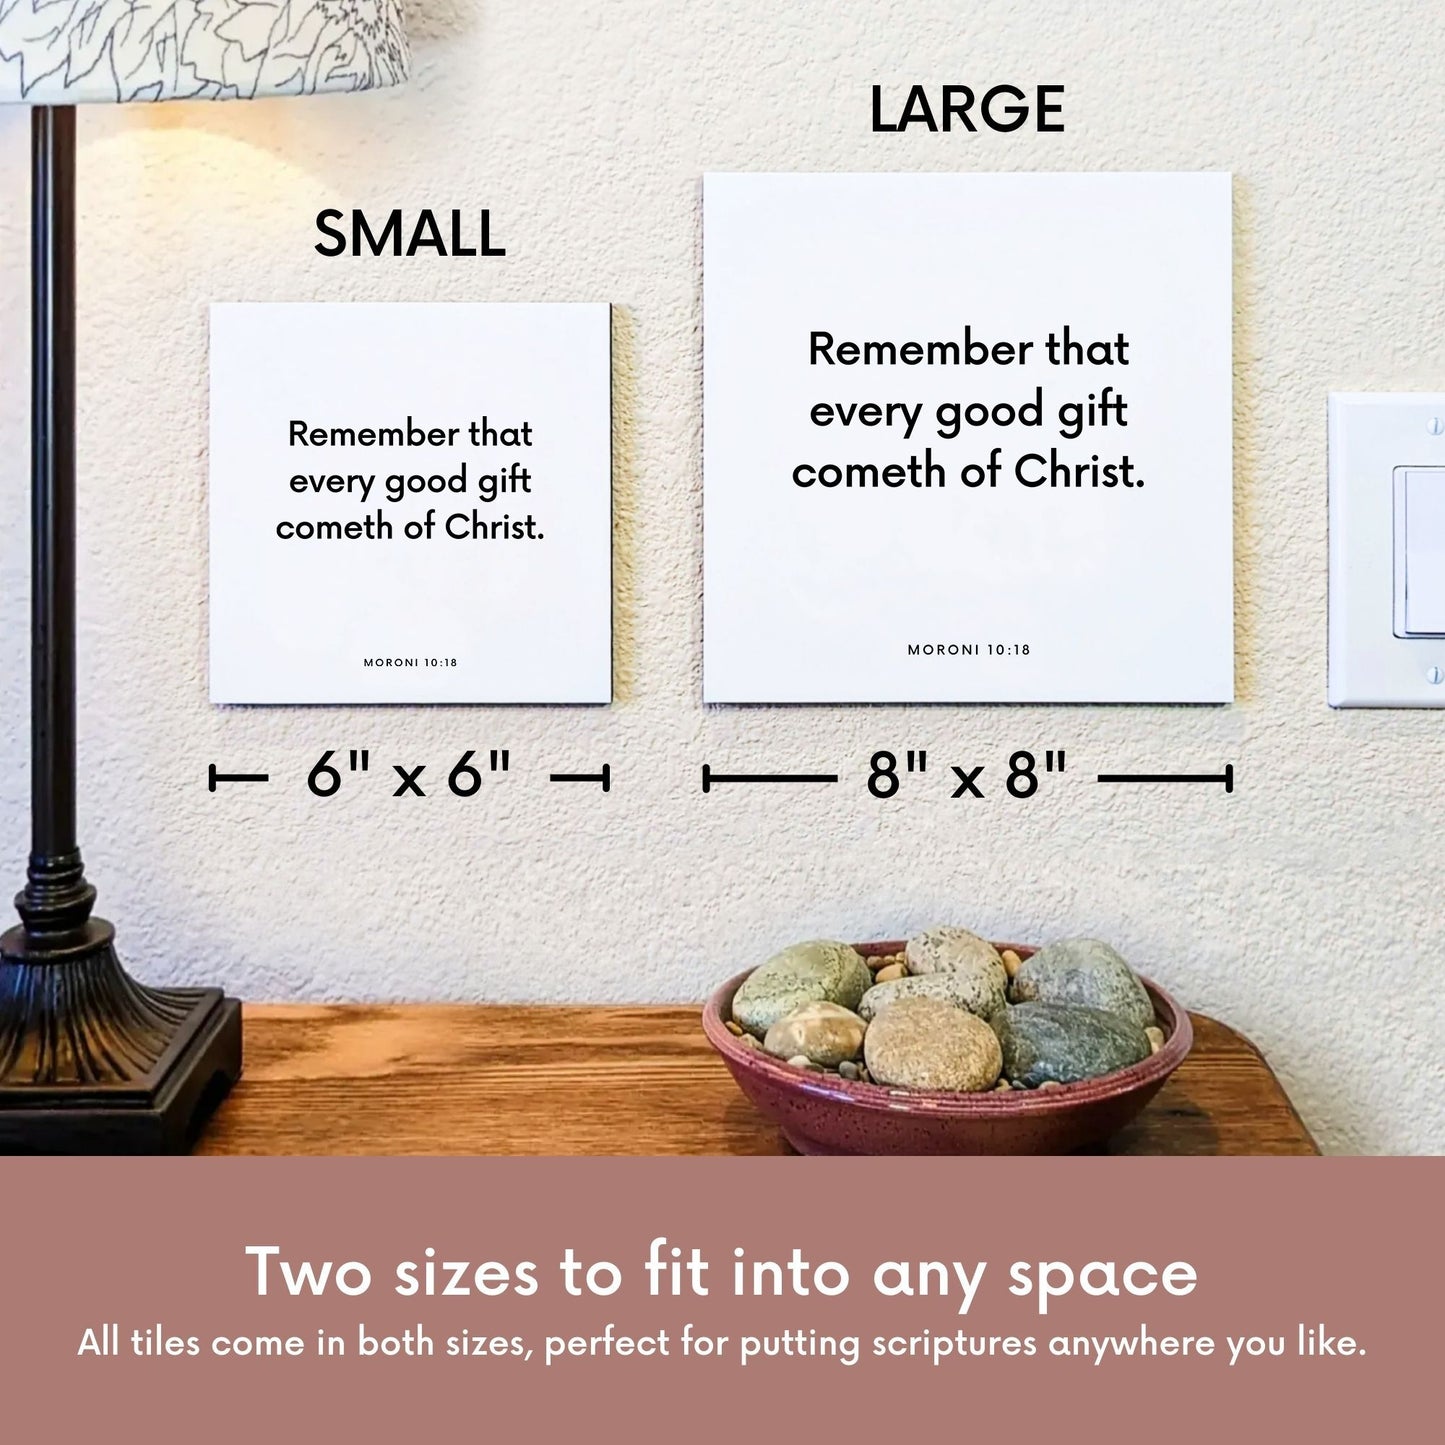 Scripture tile size comparison for Moroni 10:18 - "Every good gift cometh of Christ"